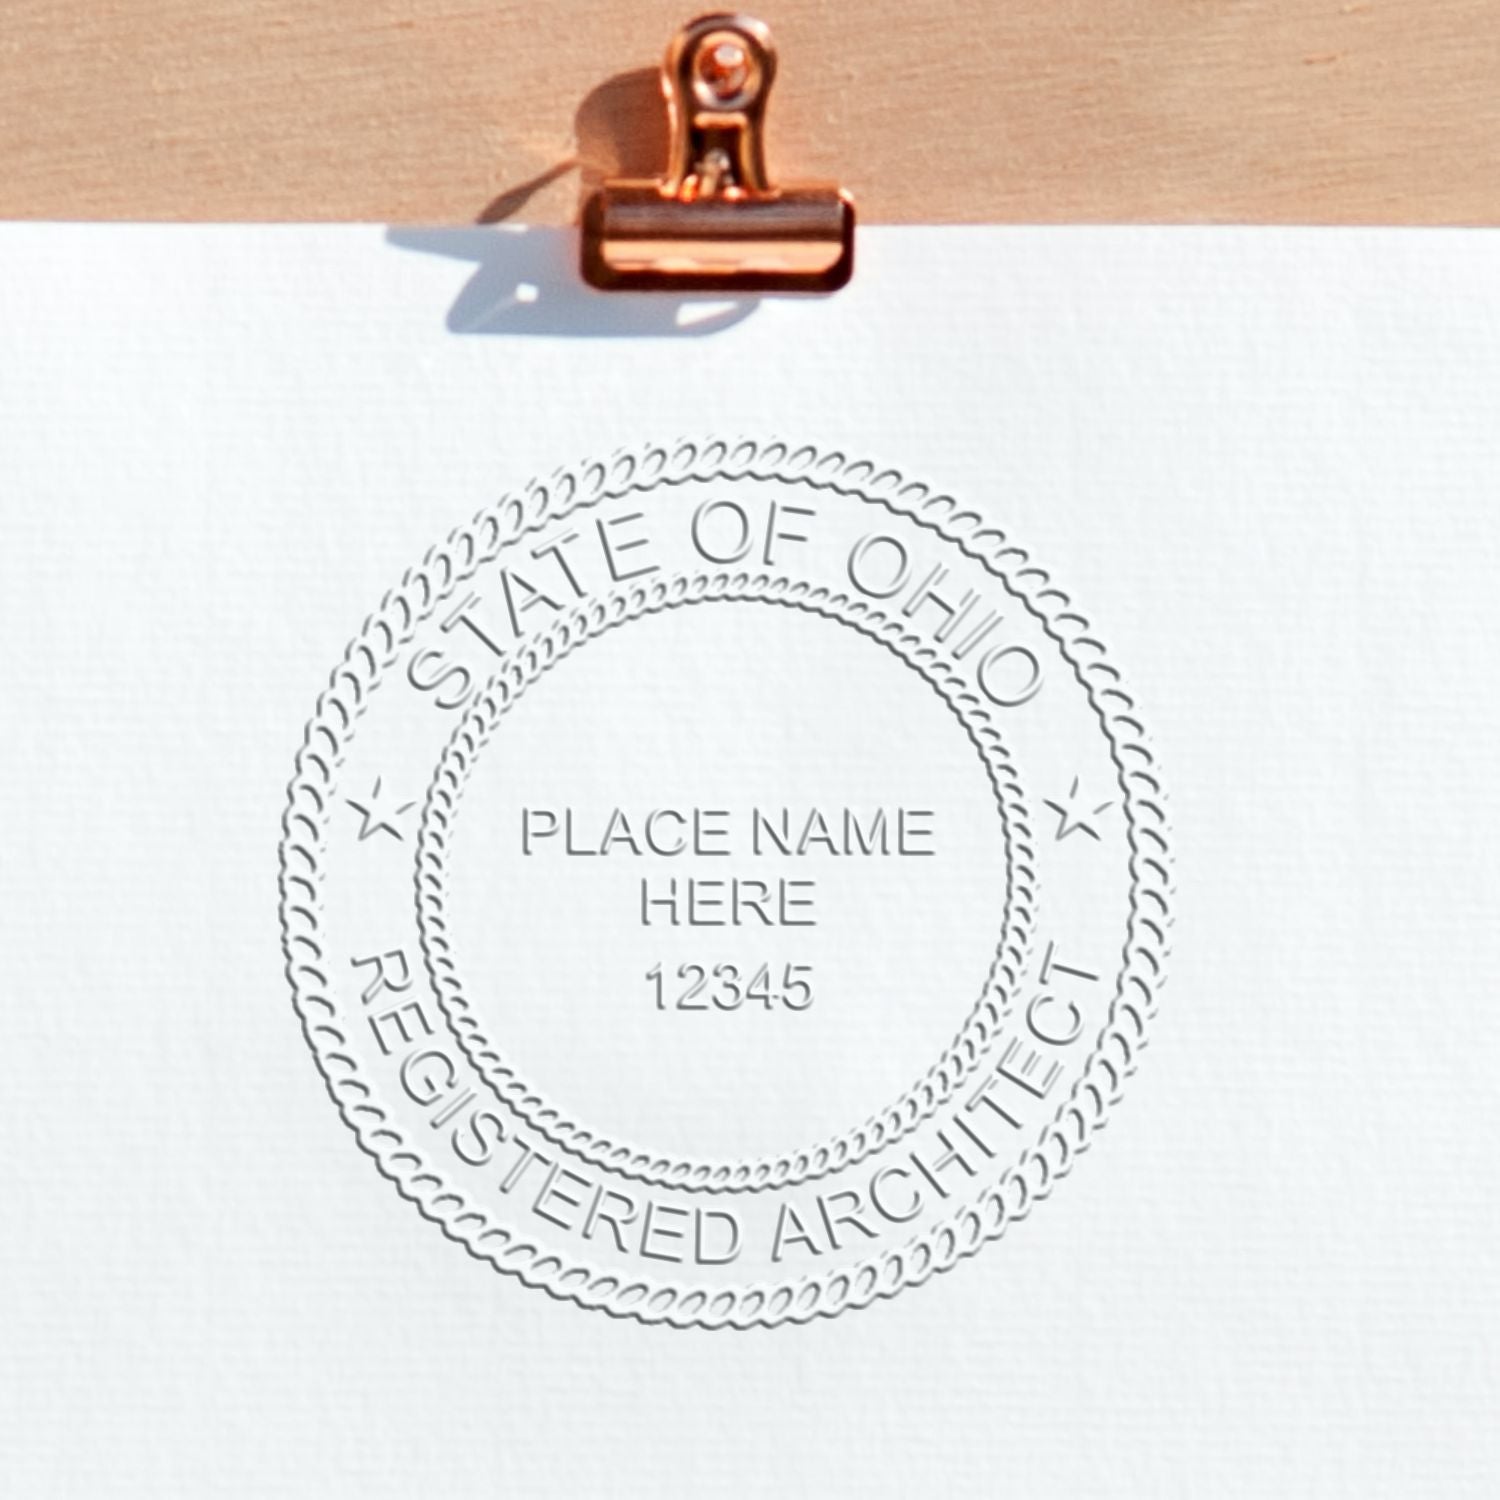 A lifestyle photo showing a stamped image of the Ohio Desk Architect Embossing Seal on a piece of paper